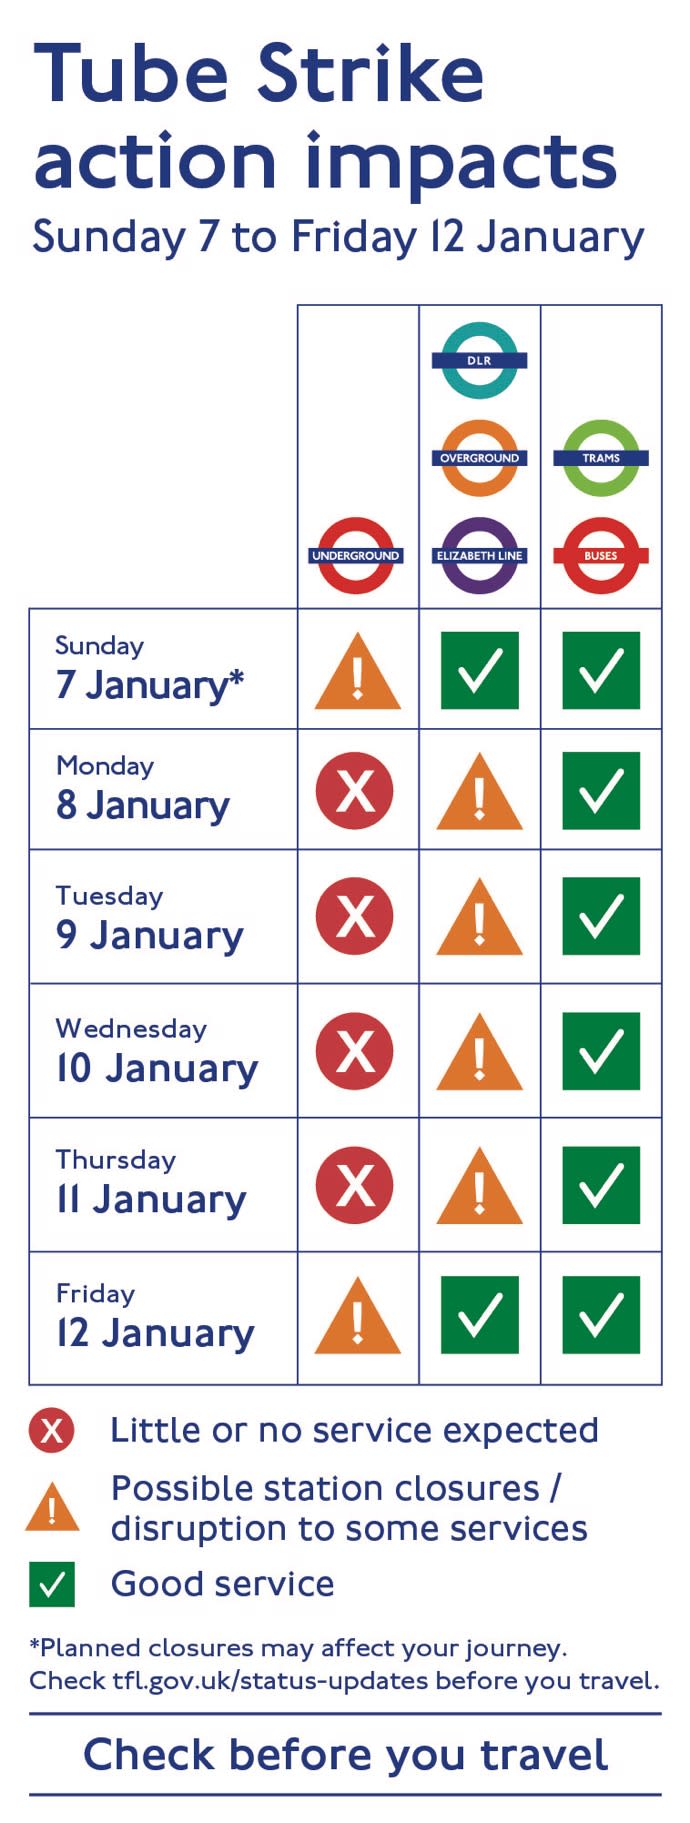 A guide shows what services aare affected and when during the Tube strike. (TfL)